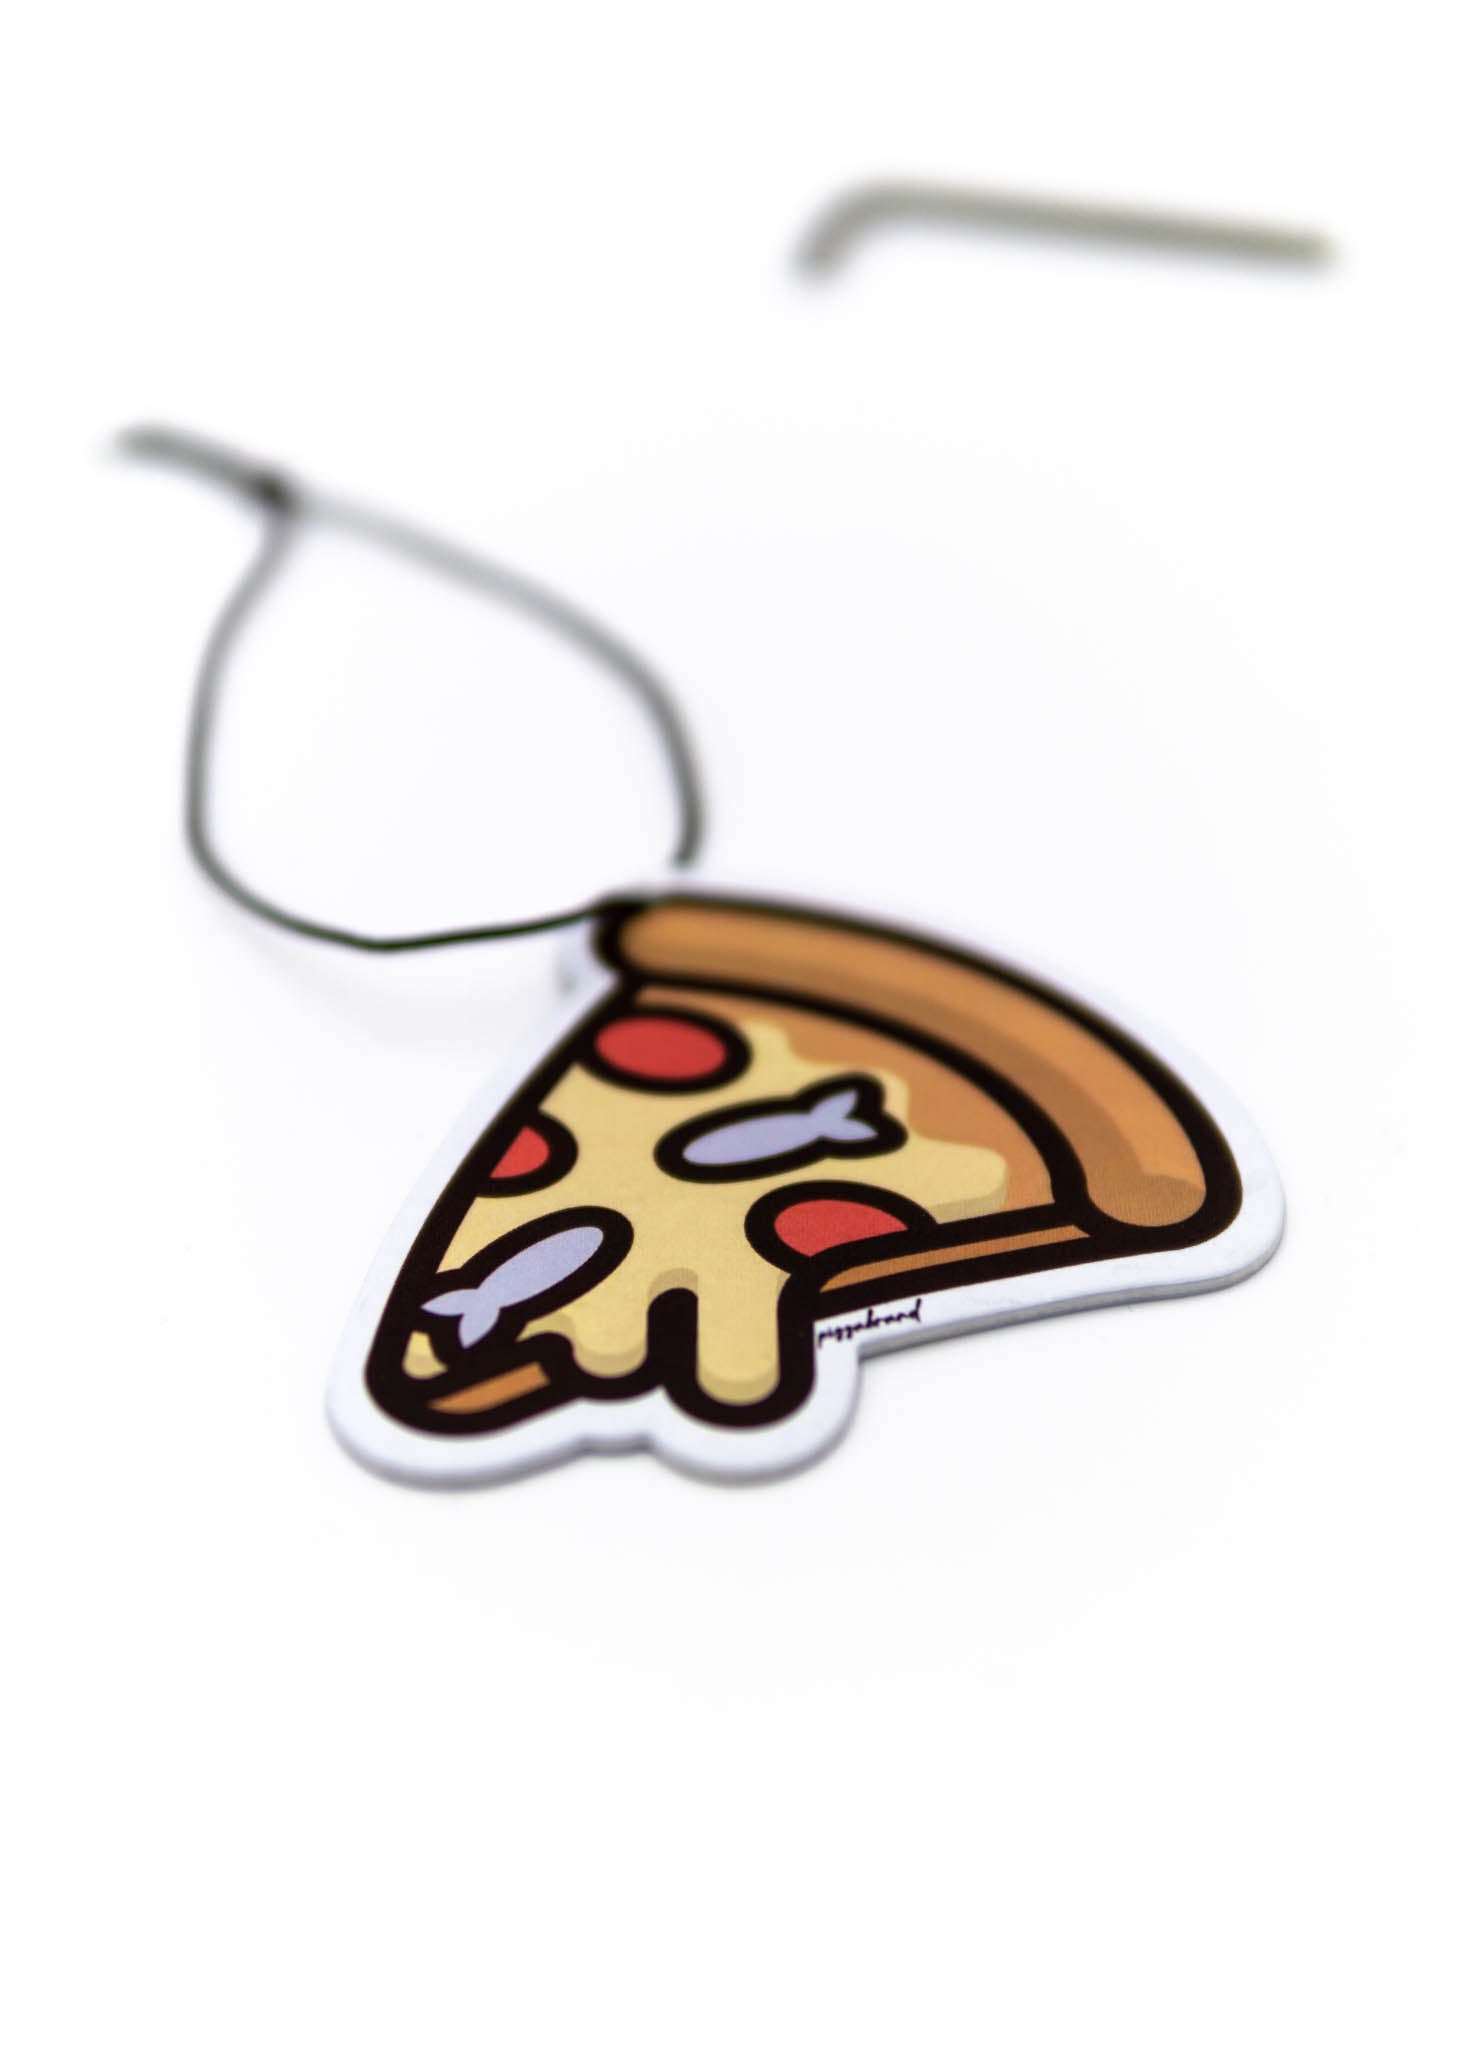 A pizzabrand anchovy and pepperonin air freshener. Photo is a close up of the car air freshener with string.